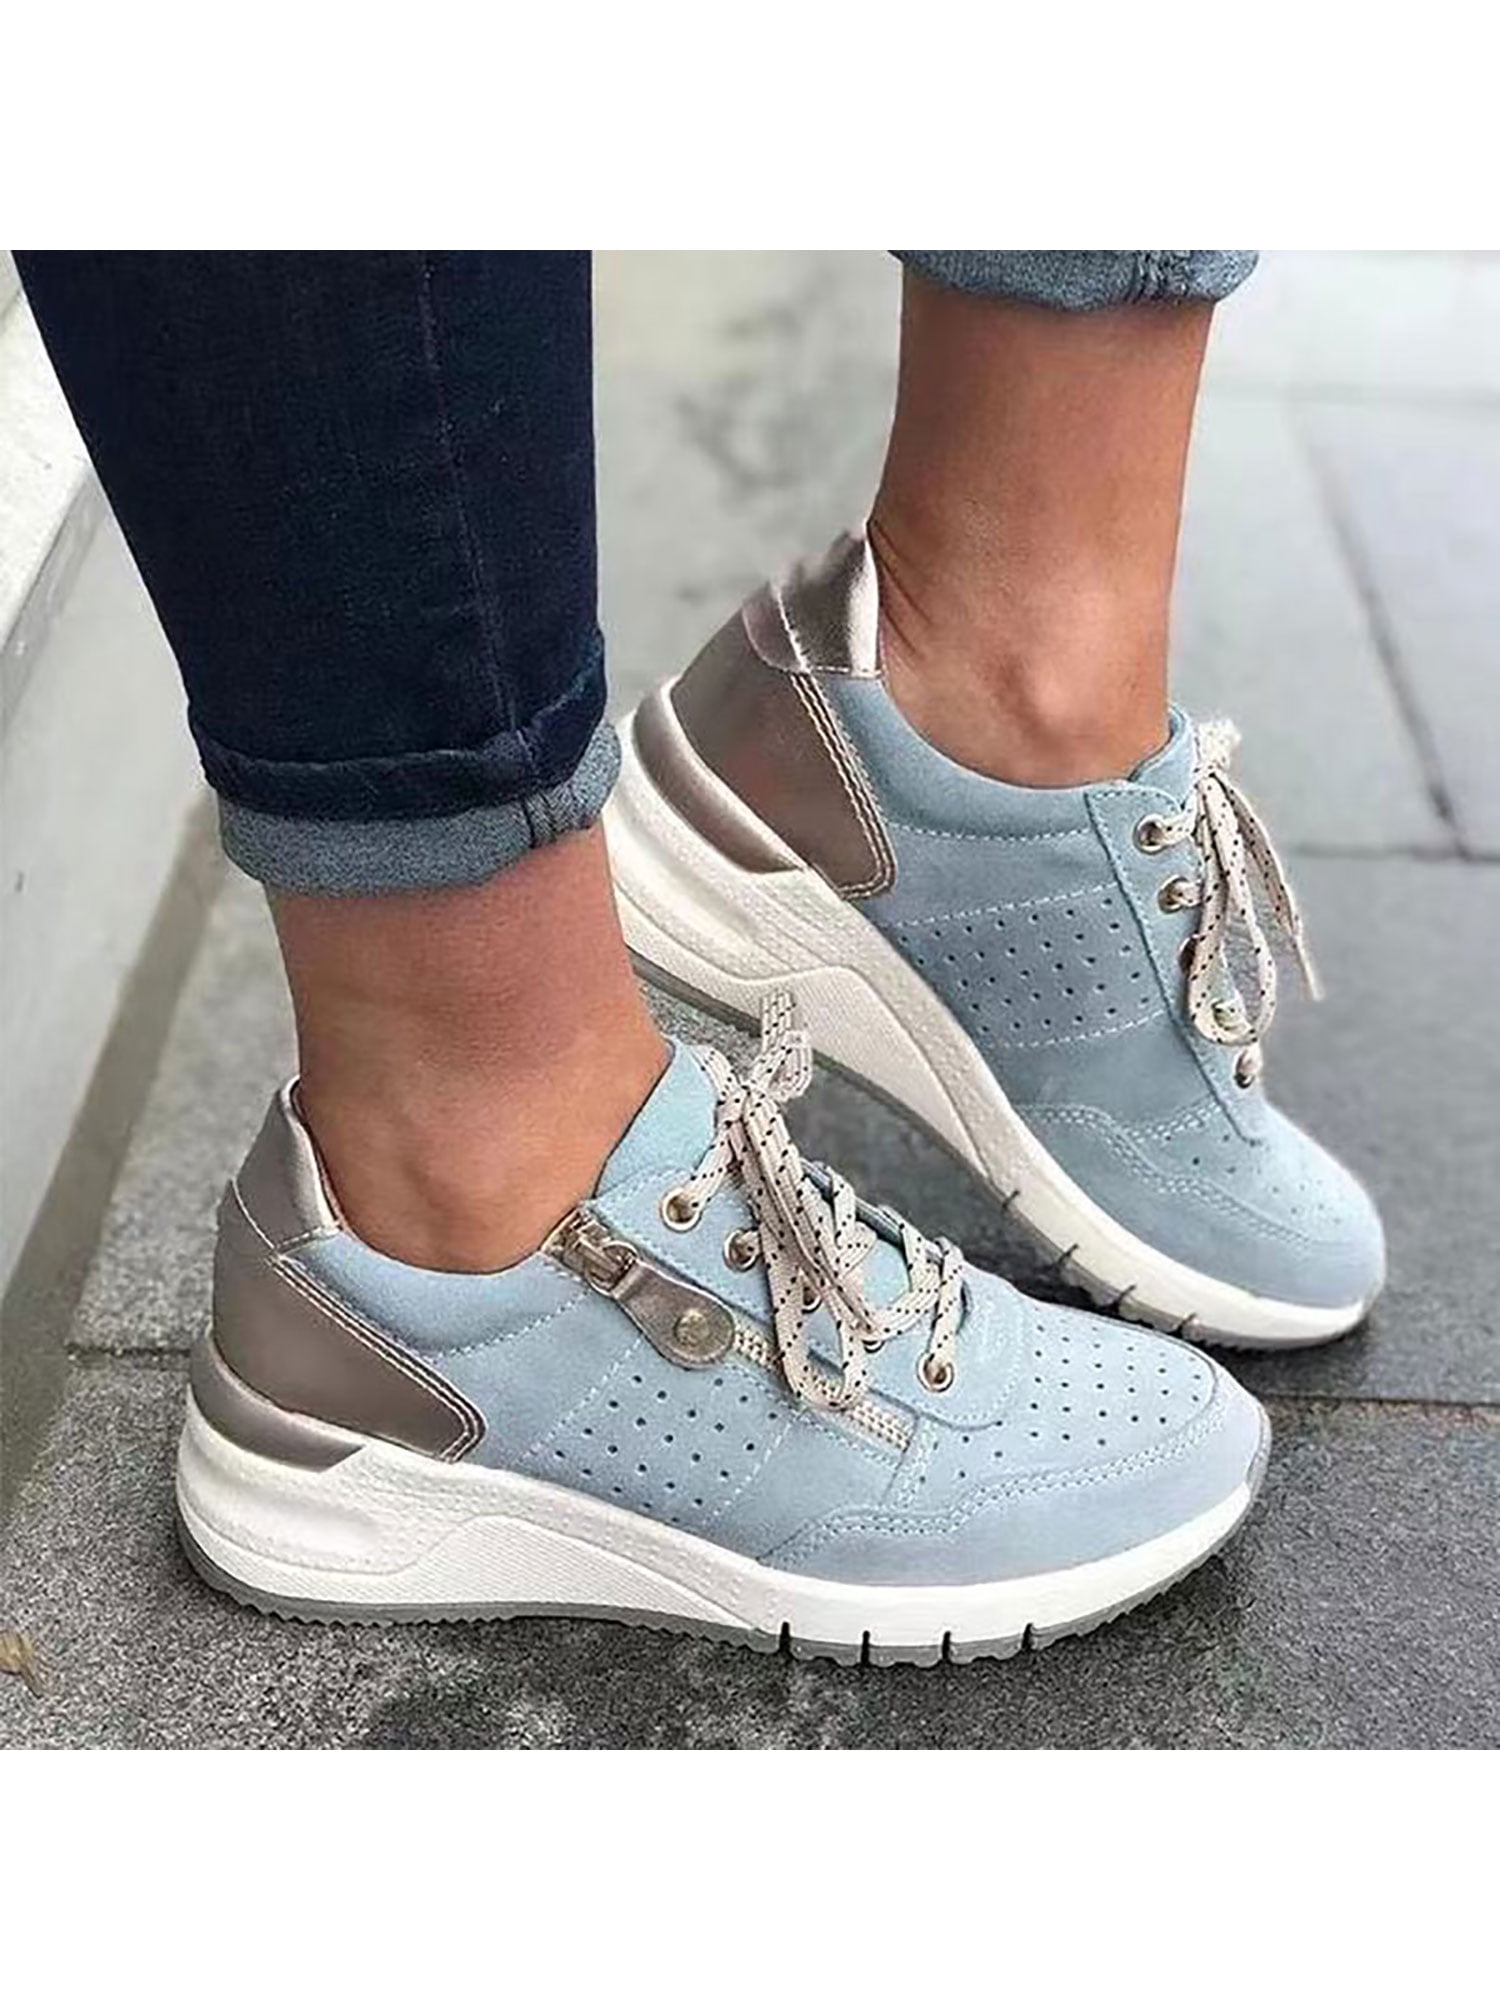 Women Casual Mesh Walking Shoes Nevera Platform Lightweight Sandals Wedges Loafers Fitness Sneakers Mary Jane Shoes 